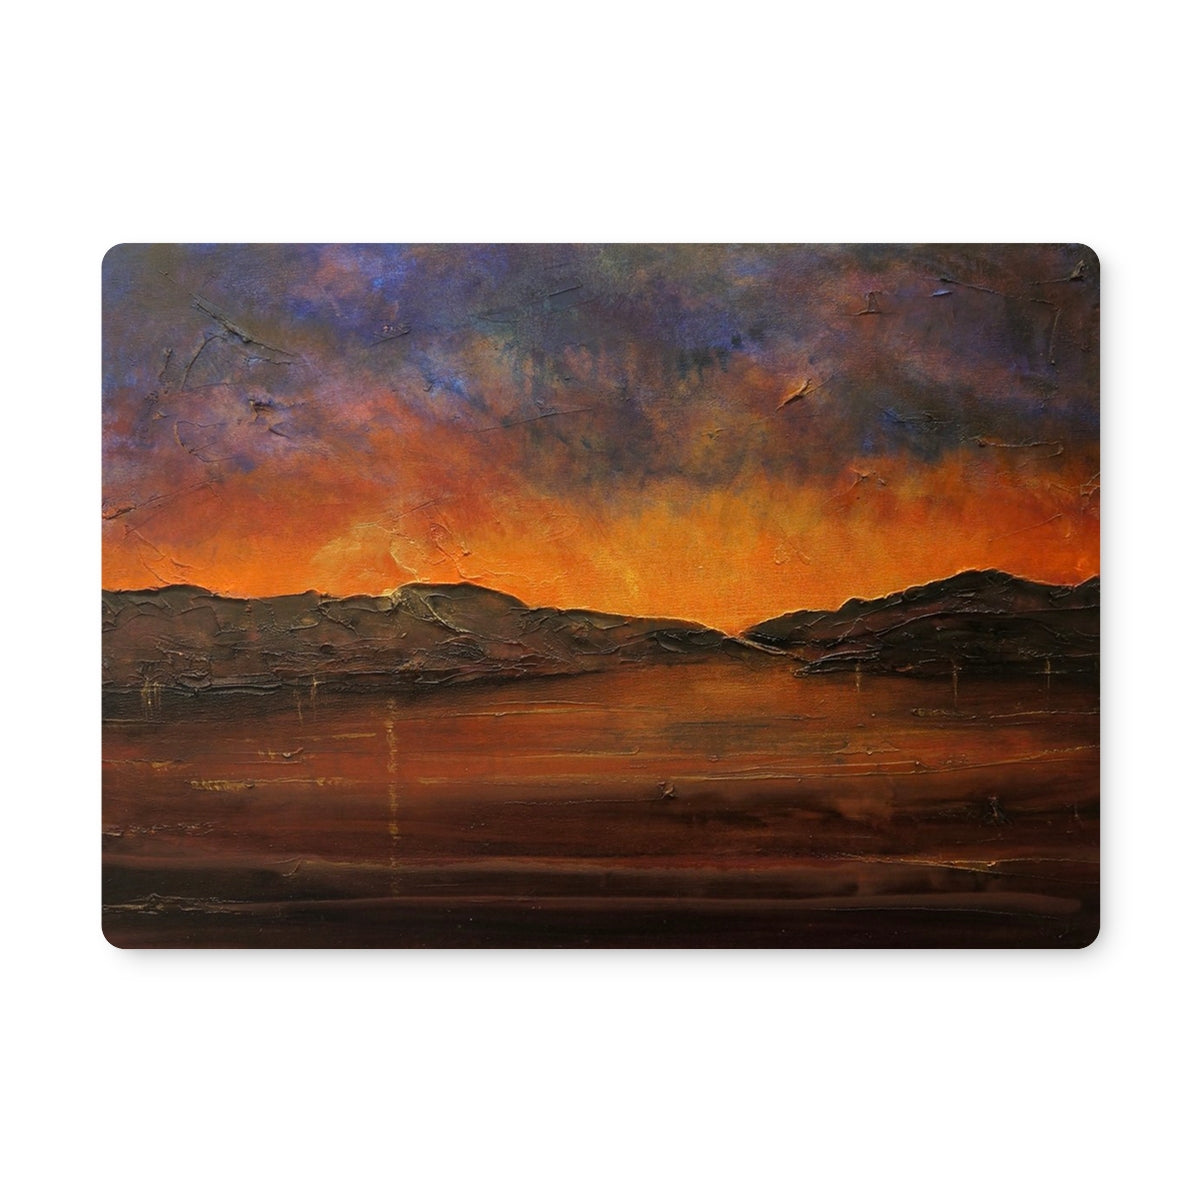 A Brooding Clyde Dusk Art Gifts Placemat-Placemats-River Clyde Art Gallery-Single Placemat-Paintings, Prints, Homeware, Art Gifts From Scotland By Scottish Artist Kevin Hunter